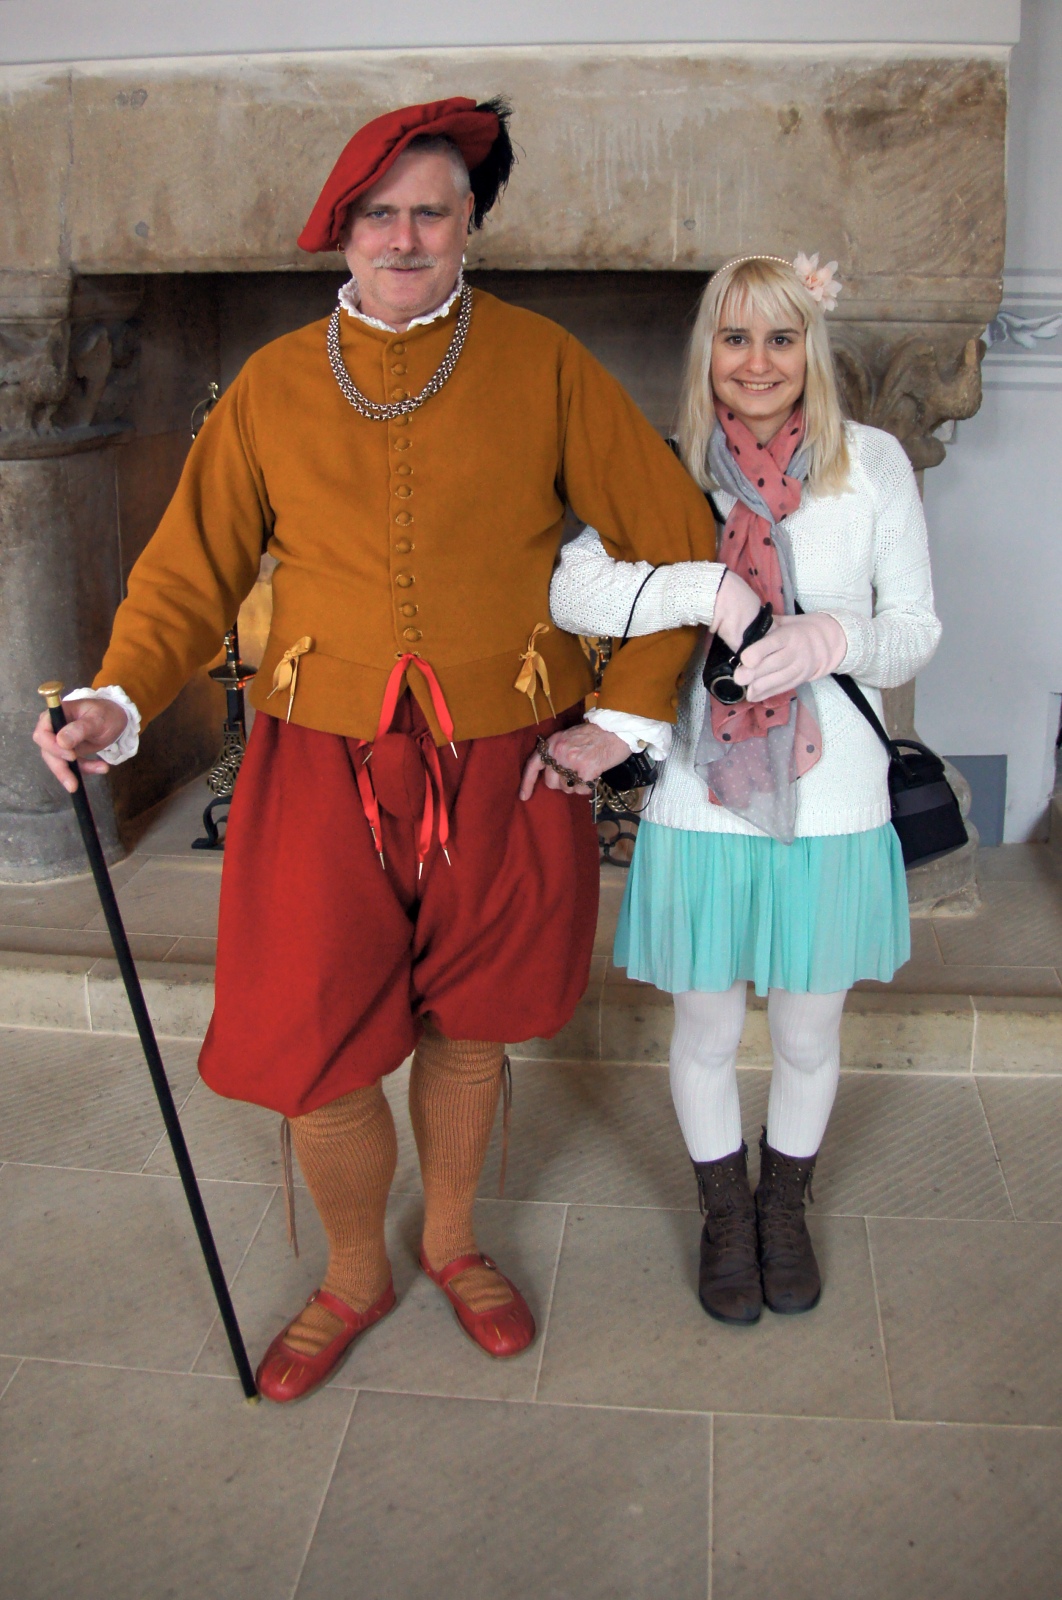 Lisa and the Squire